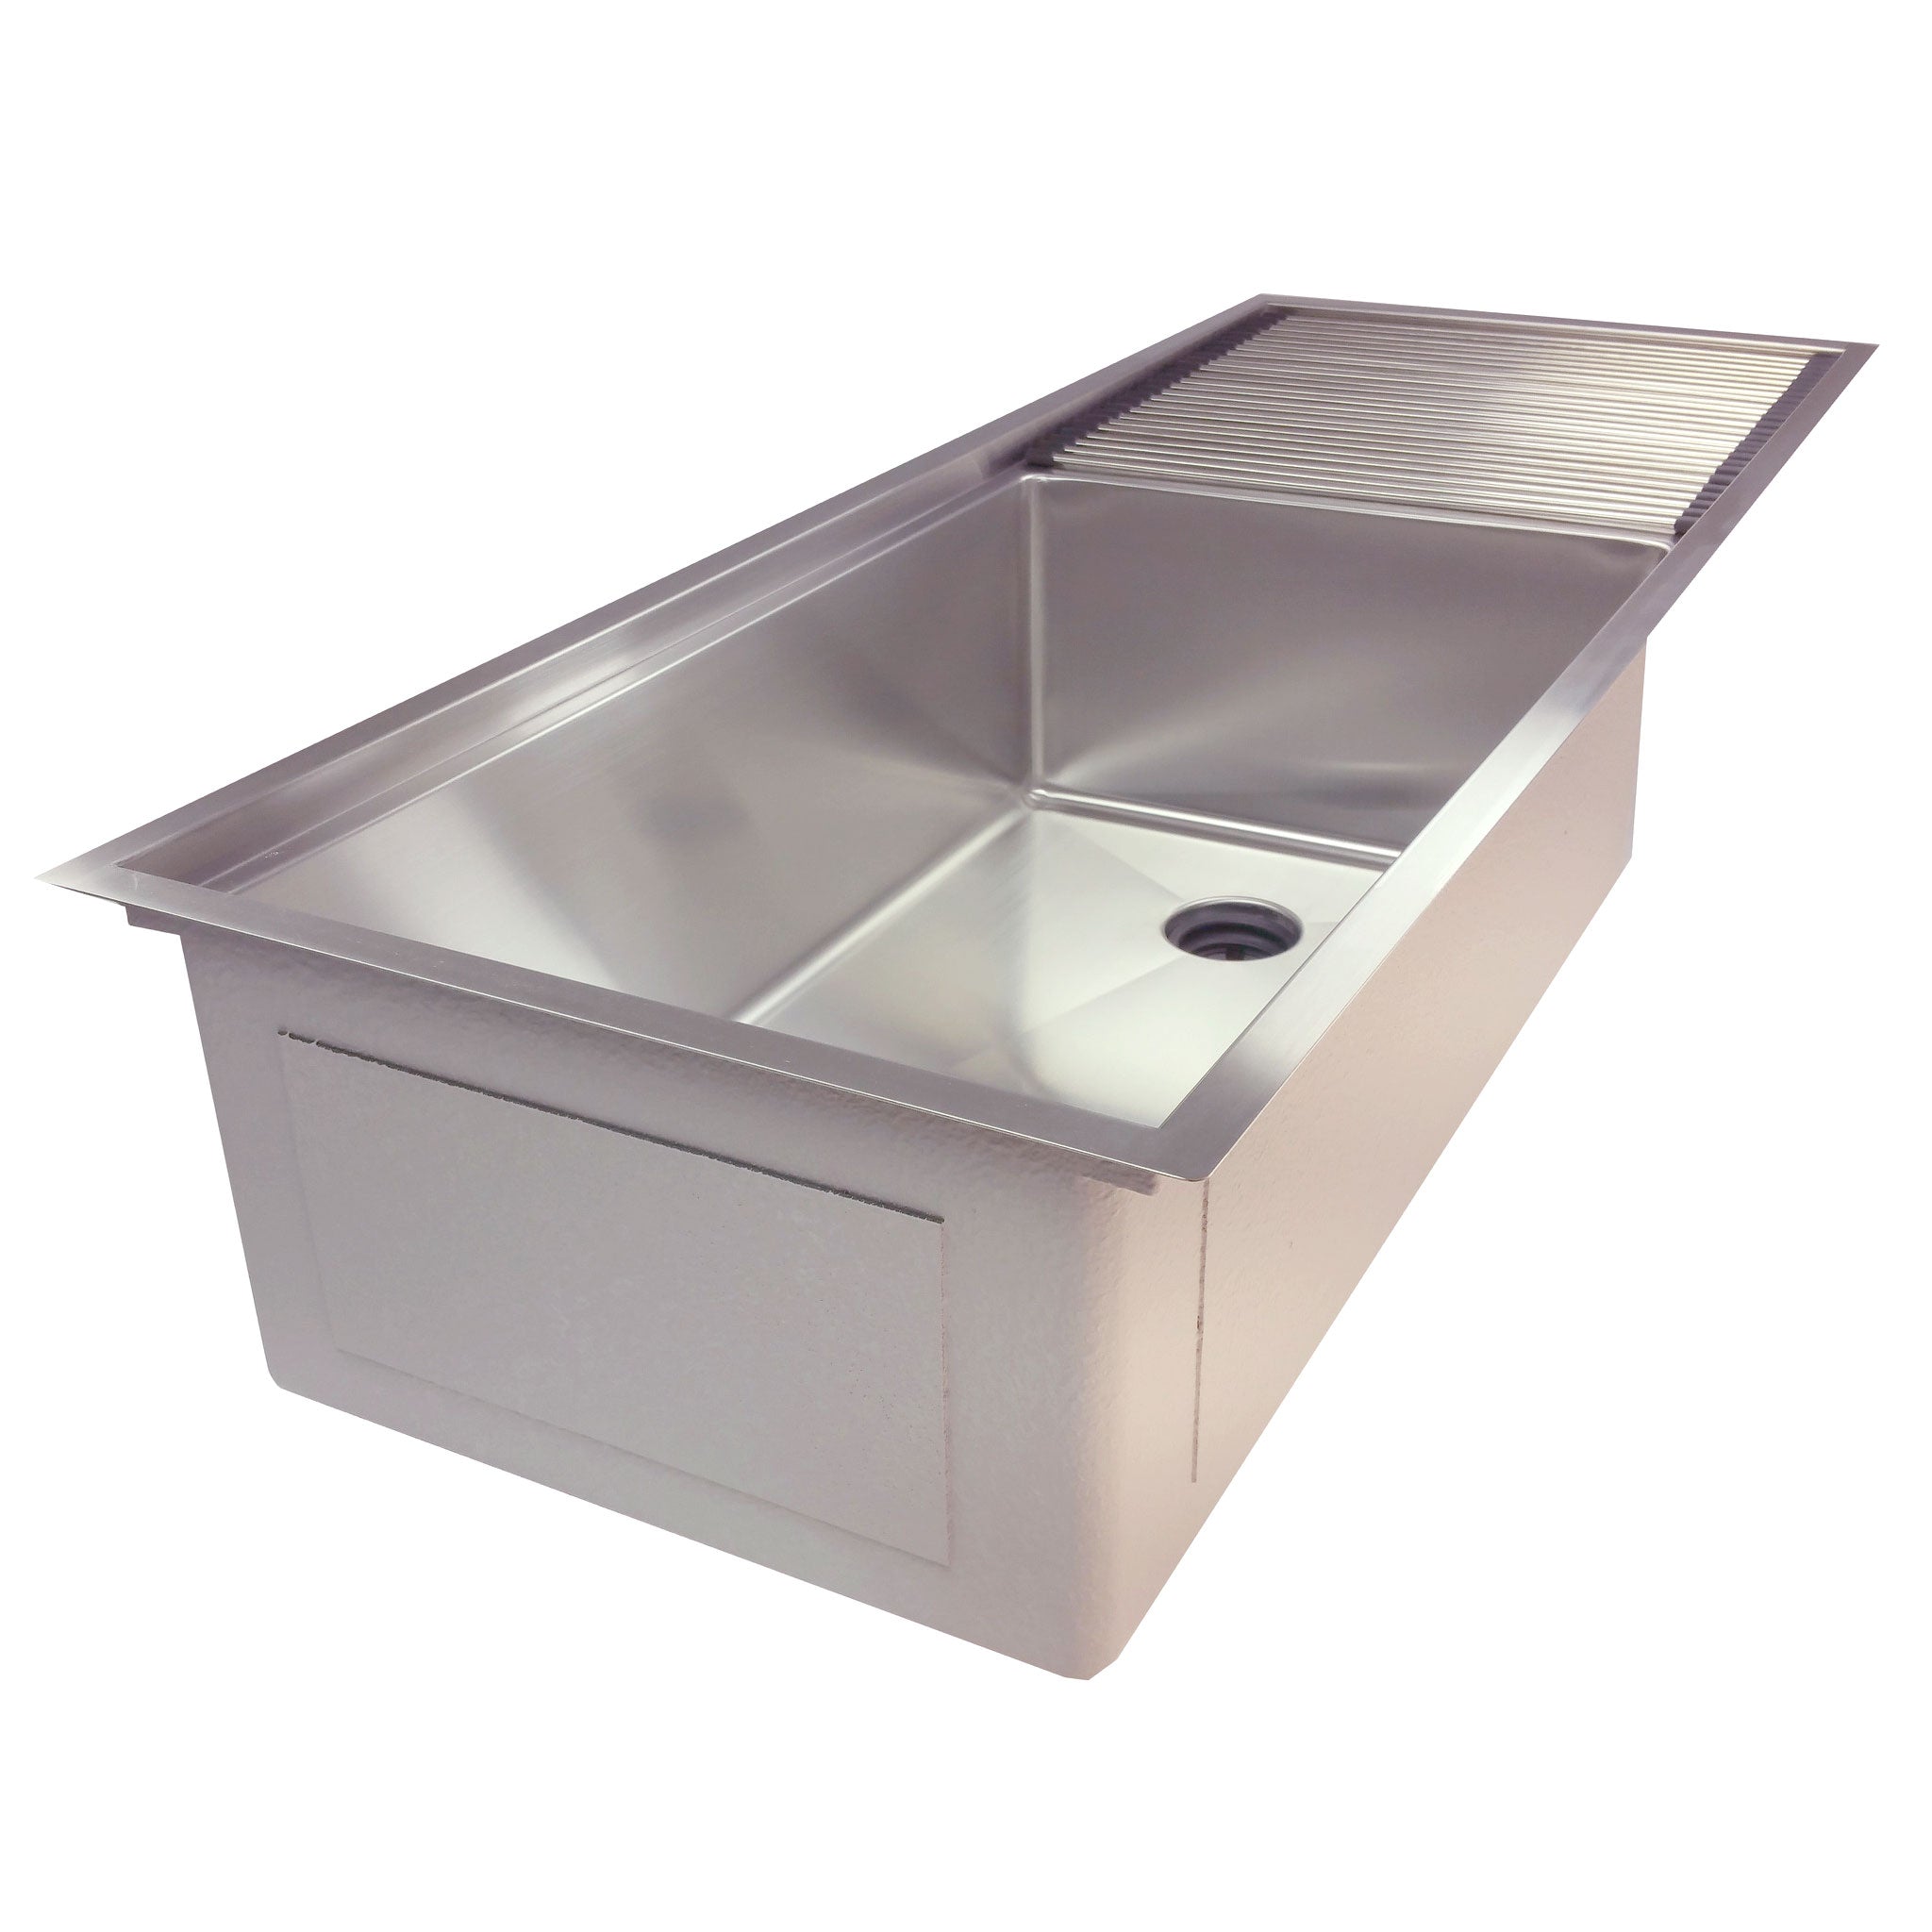 https://www.creategoodsinks.com/cdn/shop/products/Ledge_stainless_steel_single_bowl_drainboard_sink_with_offset_drain_5LPS50_928bdc65-3a78-4caf-9eae-fe1f980c8c17-new.jpg?v=1680146117